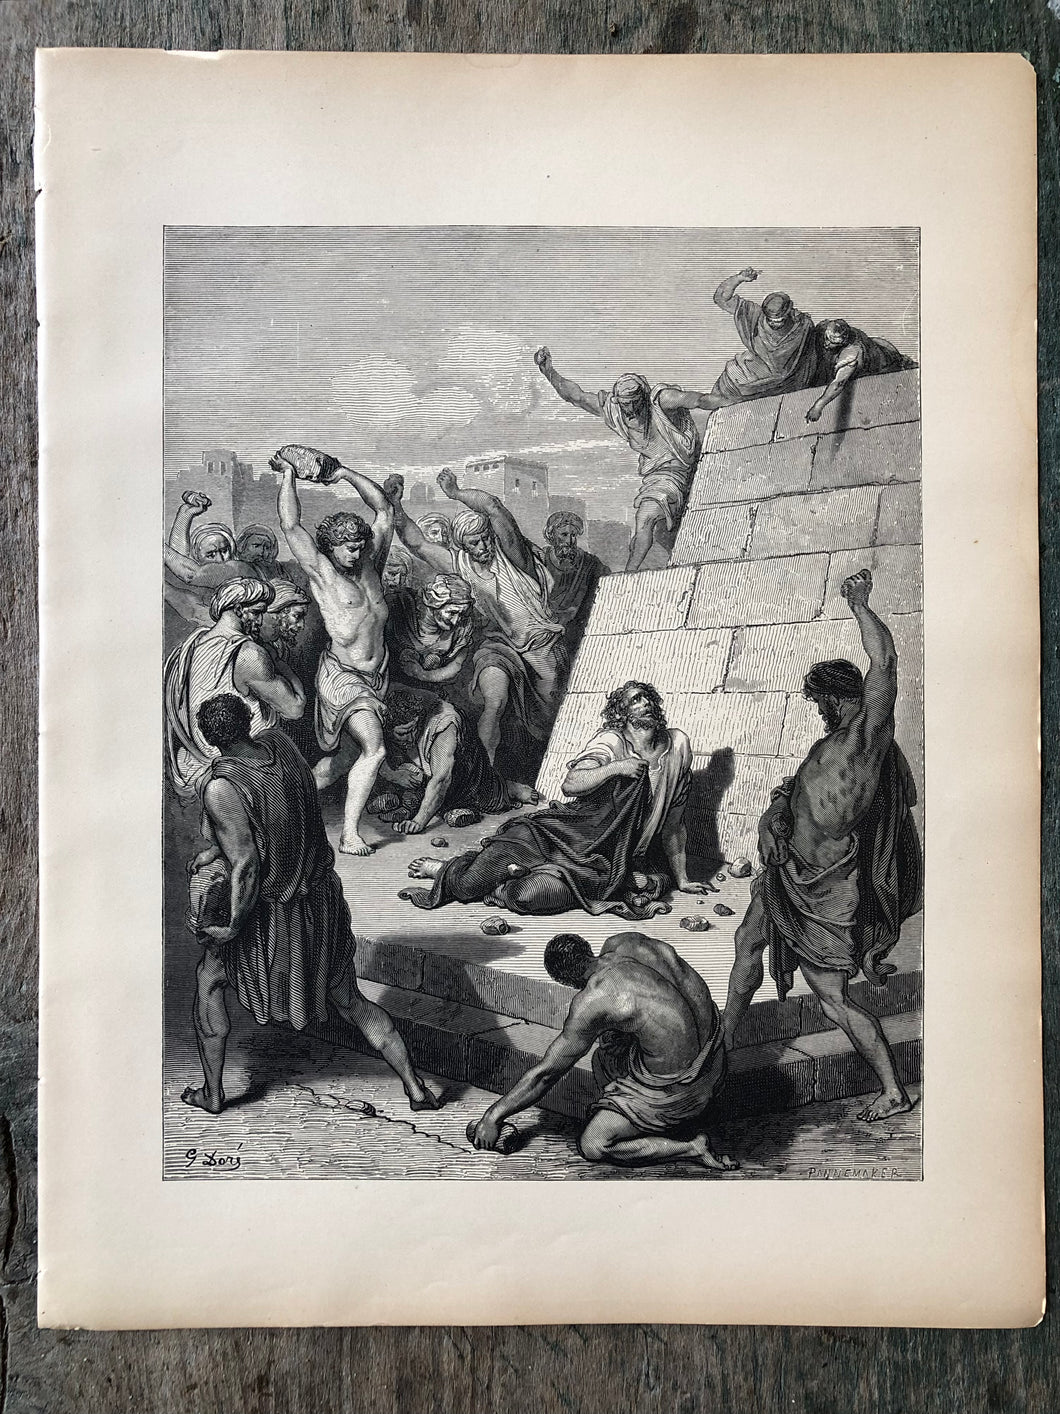 Martyrdom of St. Stephens. Print from The Dore Bible Gallery by Gustave Dore